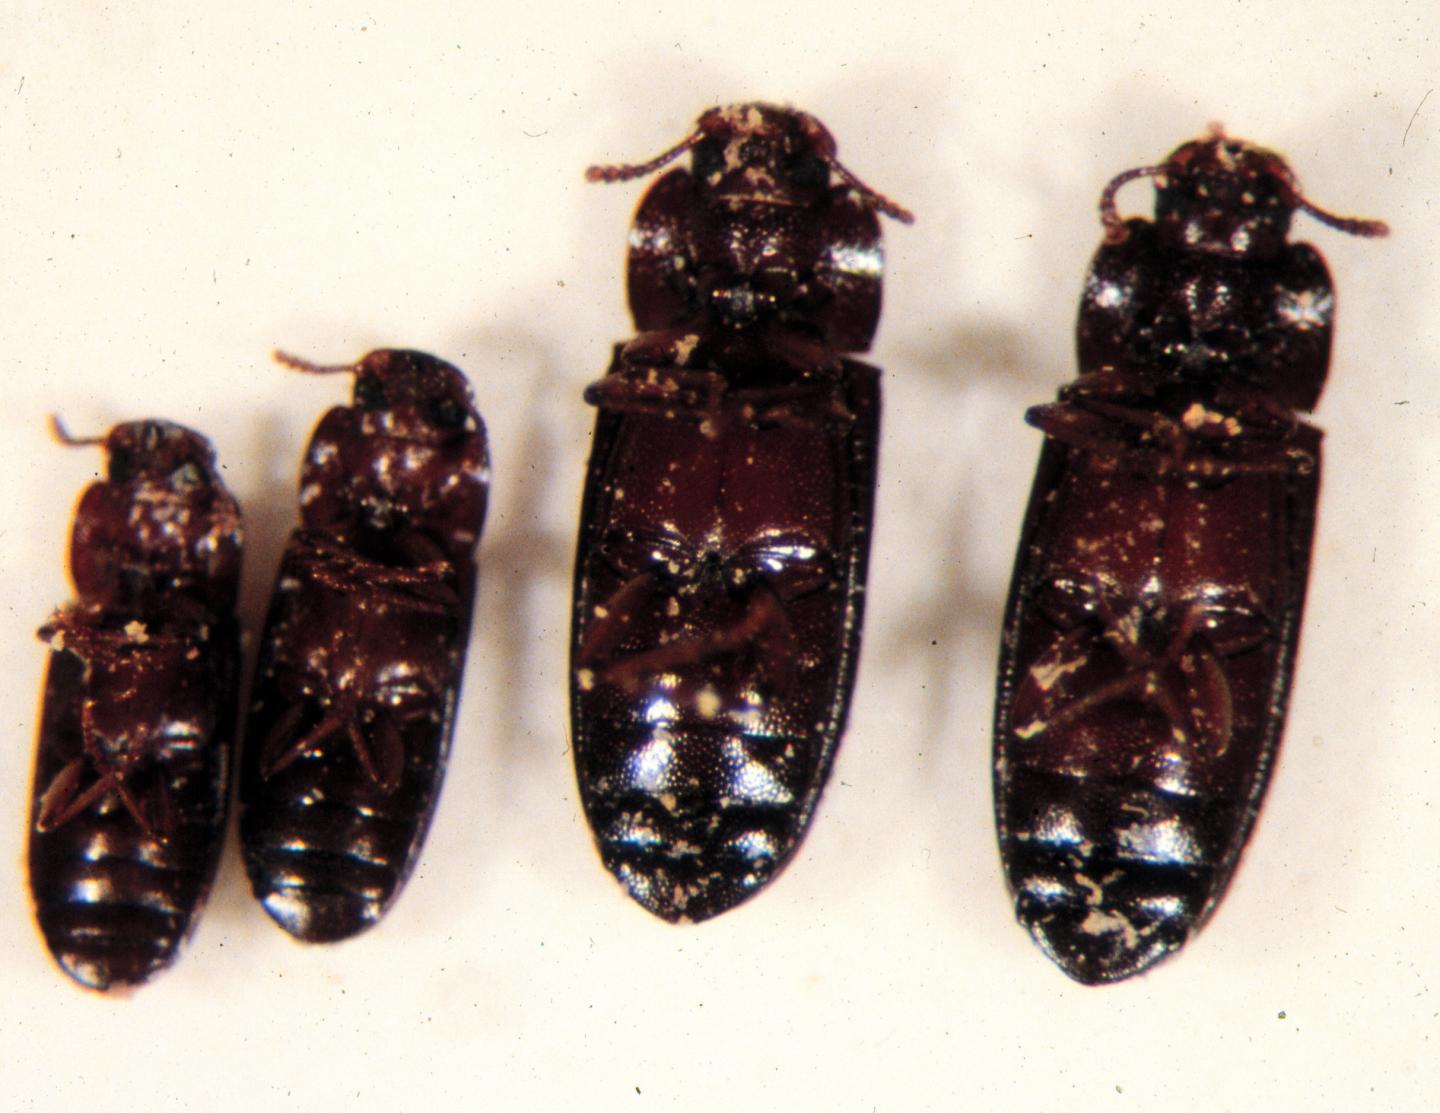 Synthetic gene drive technology for insect control can give rise to resistance. A recent study, which assessed gene drive performance in four varieties of the flour beetle <i>Tribolium castaneum</i>, suggests that ever rare resistance-favoring alleles can defeat a gene drive—unless the intervention accounts for the variability of genetic targets and the mating systems of insect populations. [Michael J. Wade/Indiana University]” /><br />
<span class=